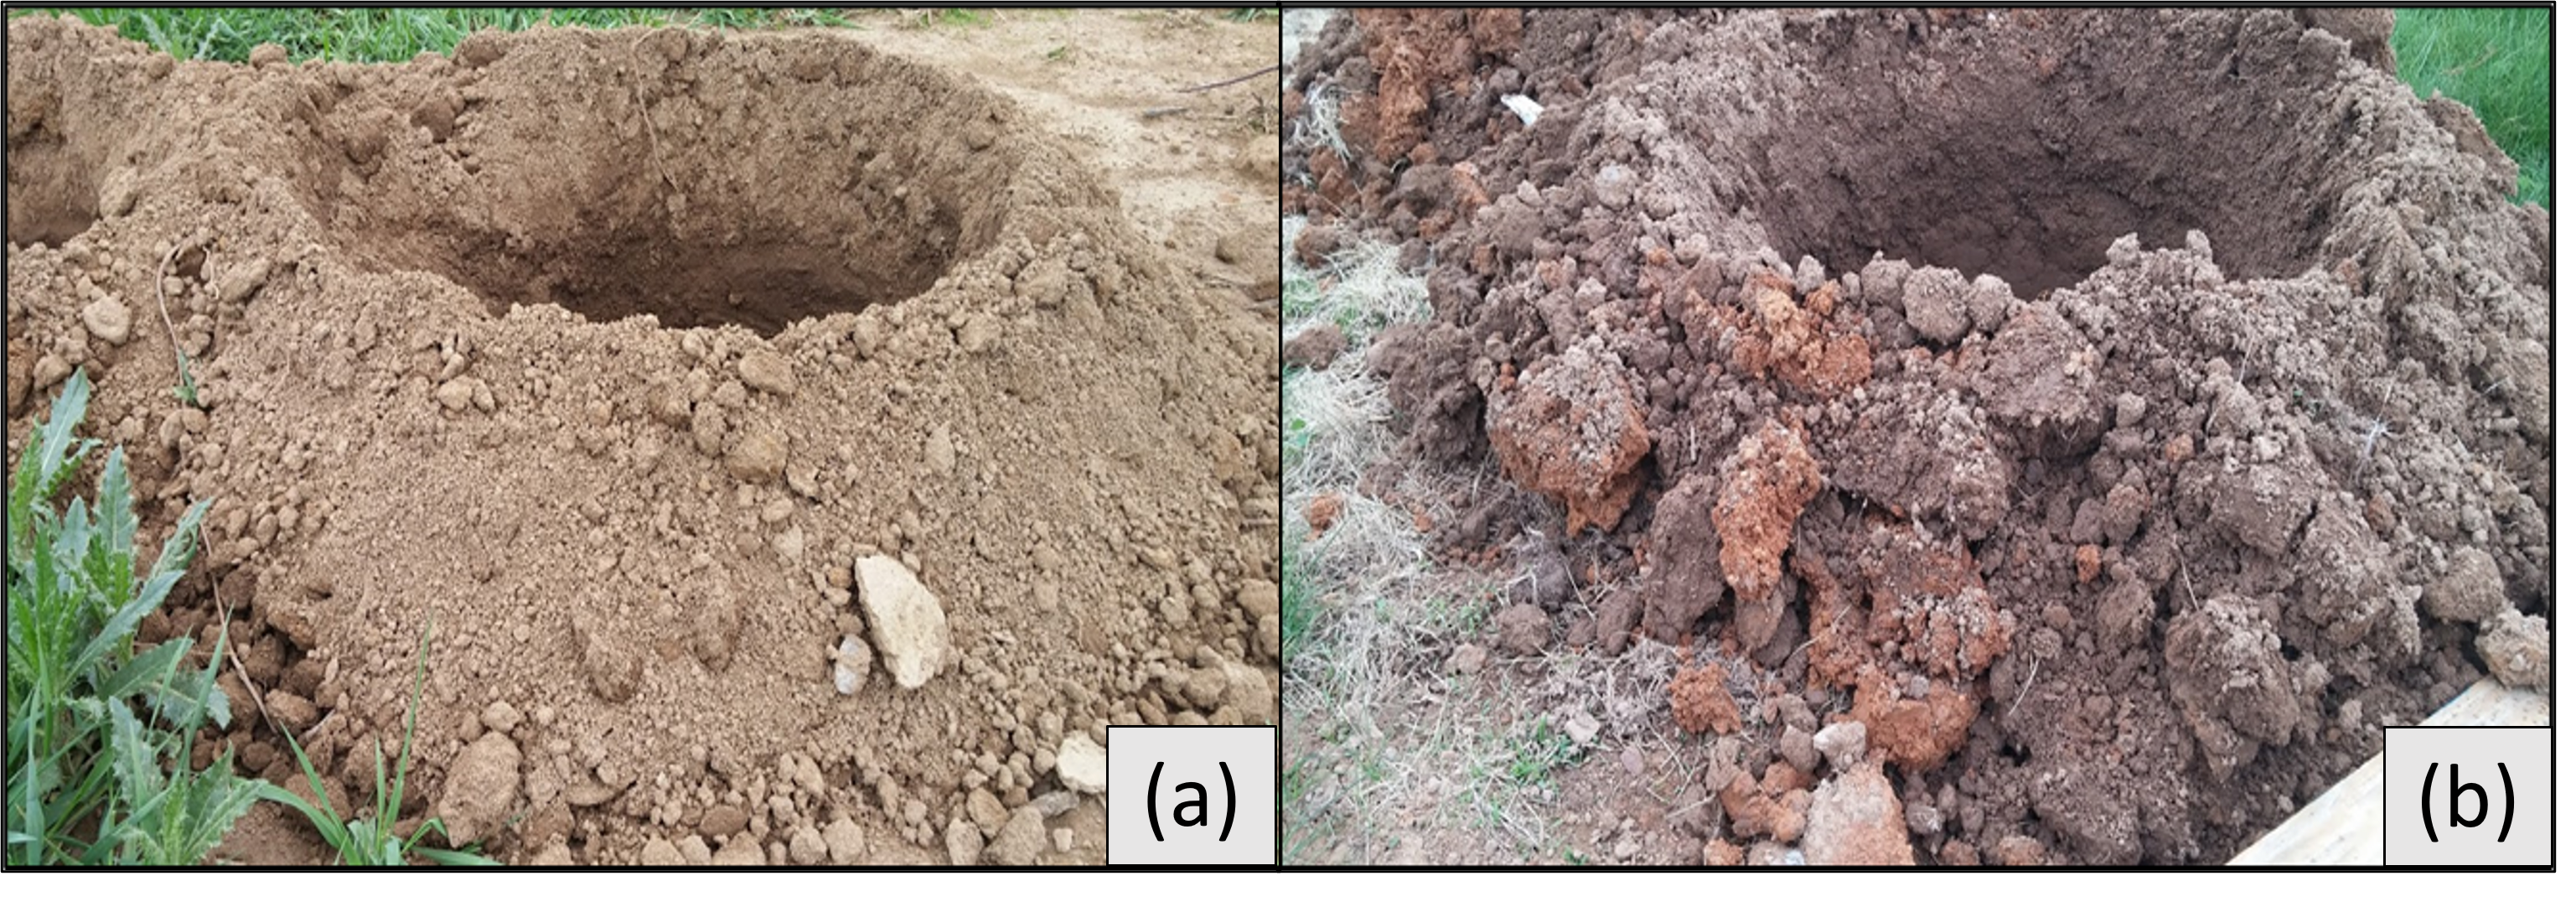 Two pictures showing soil from an apple tree row.